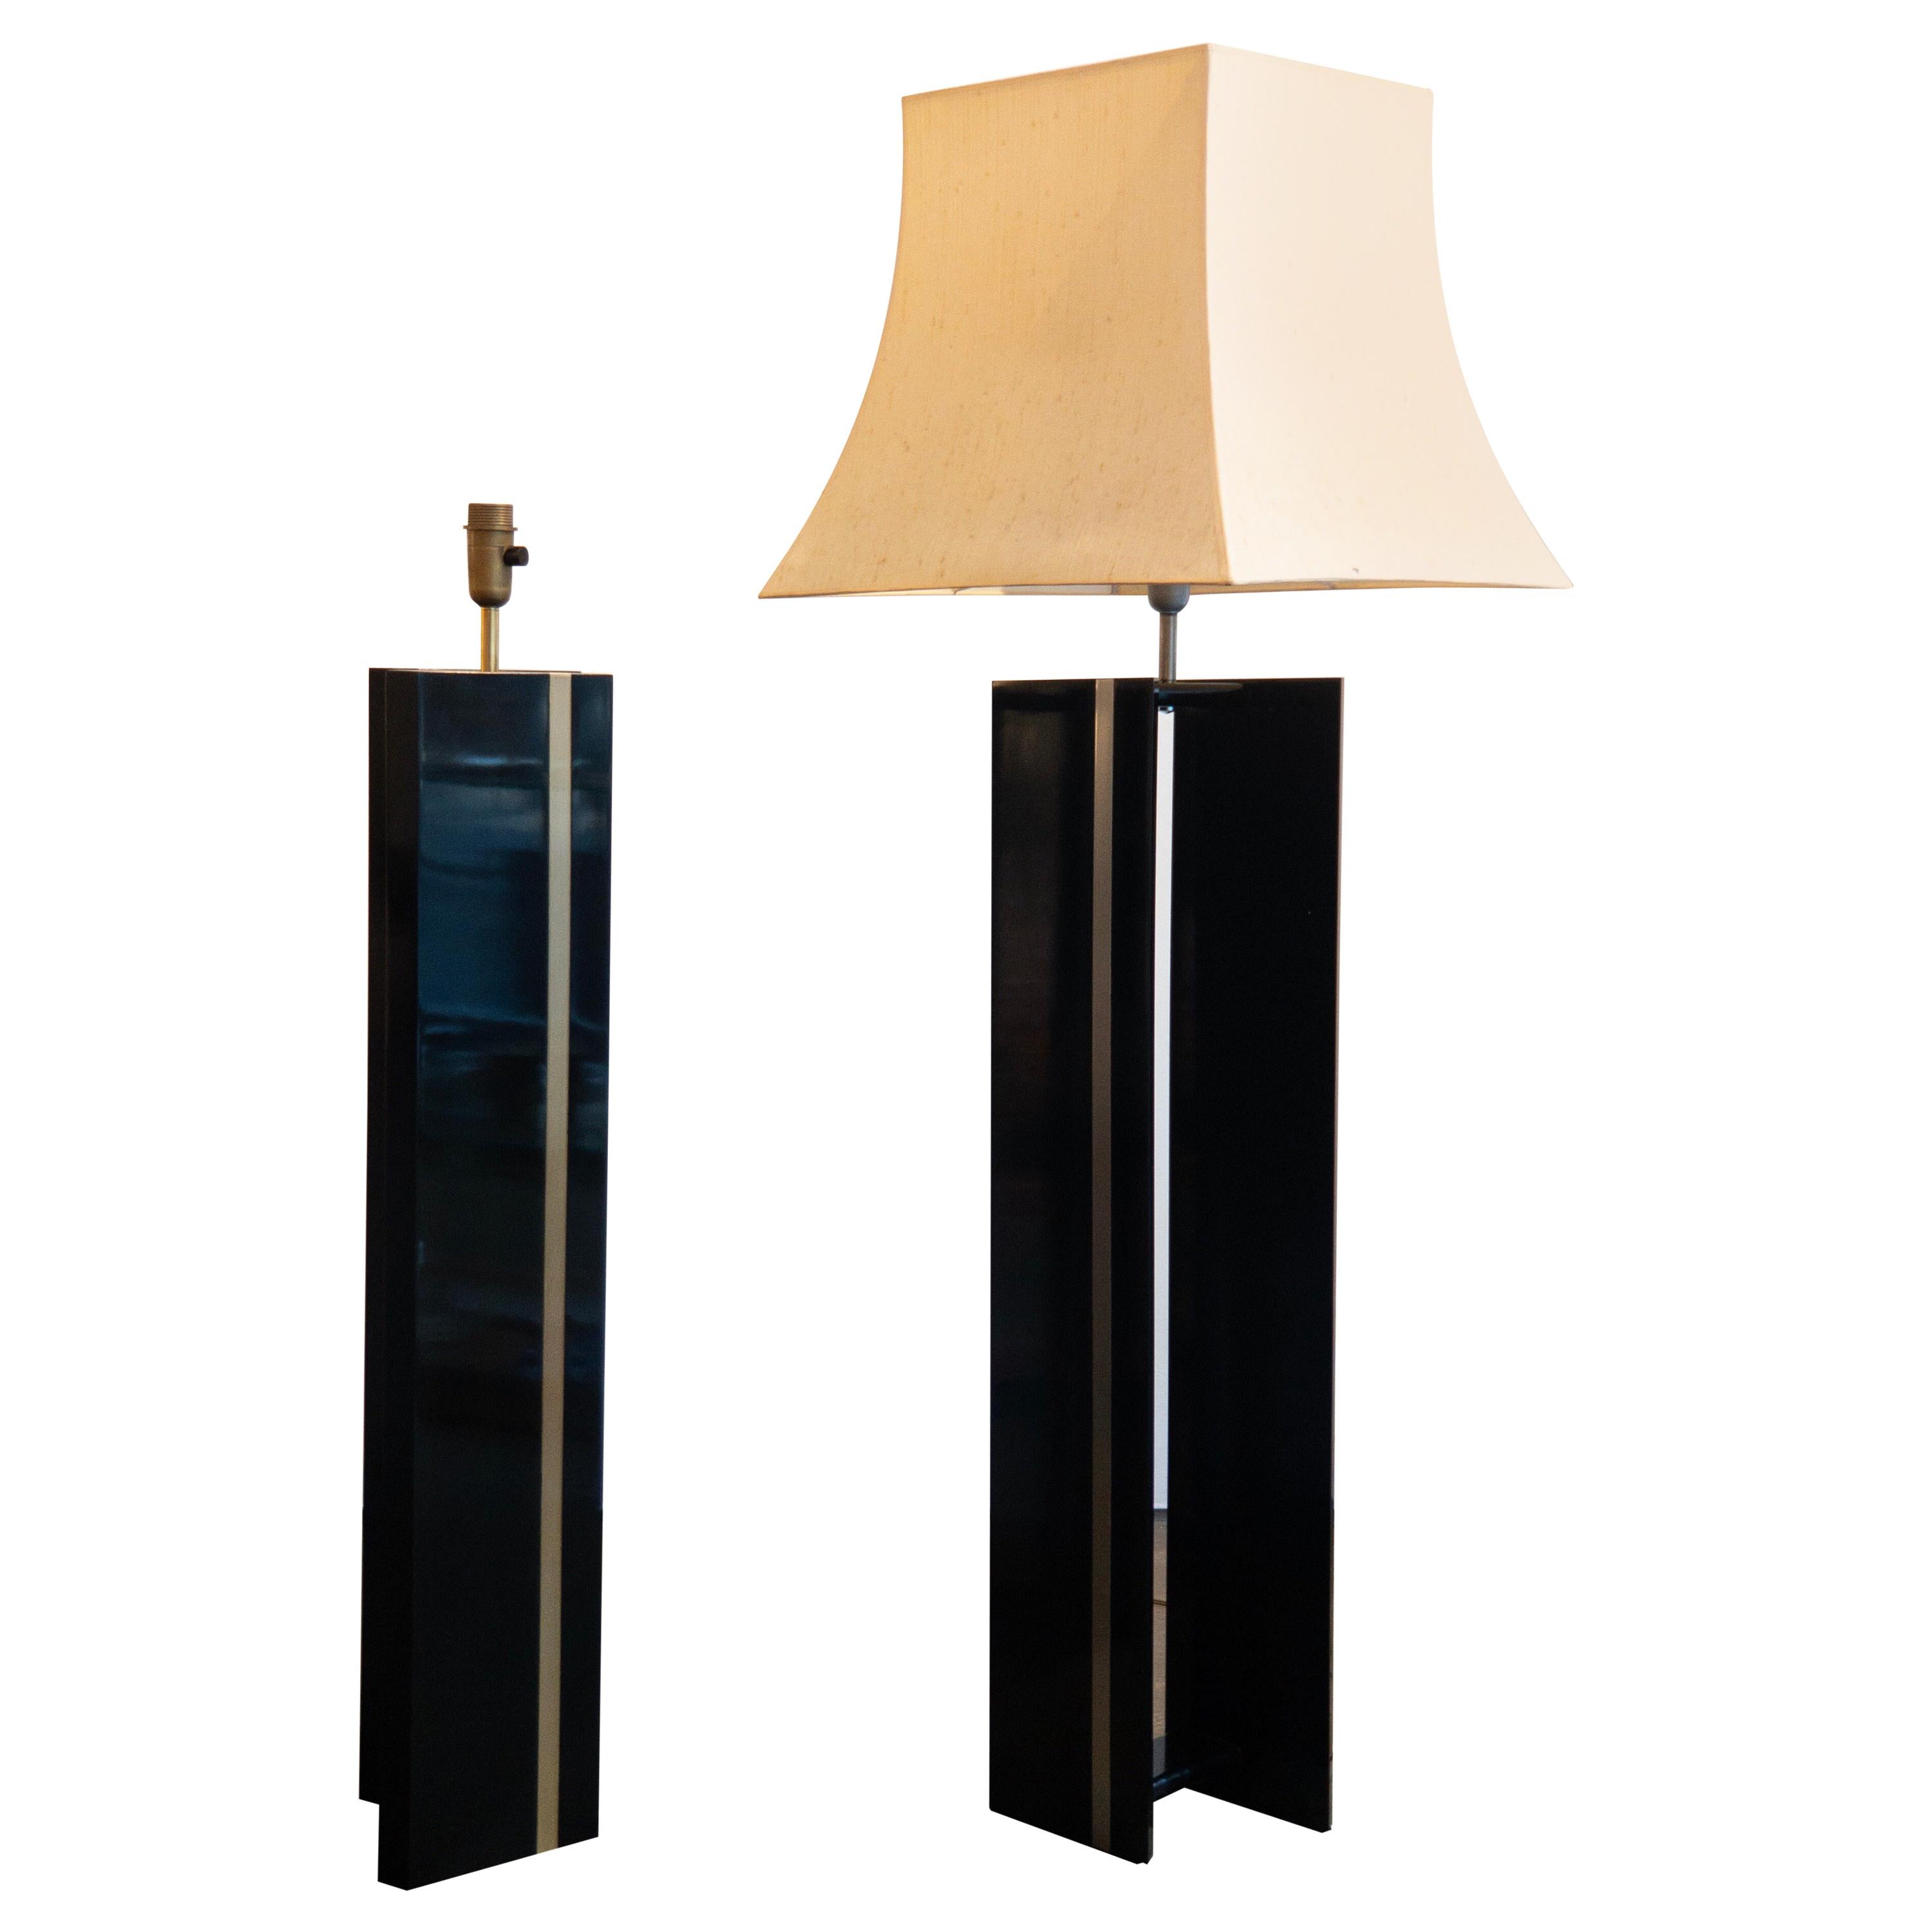 Pair of Black Lacquered Brass Art Deco Table Lamps from France, 1940s For Sale